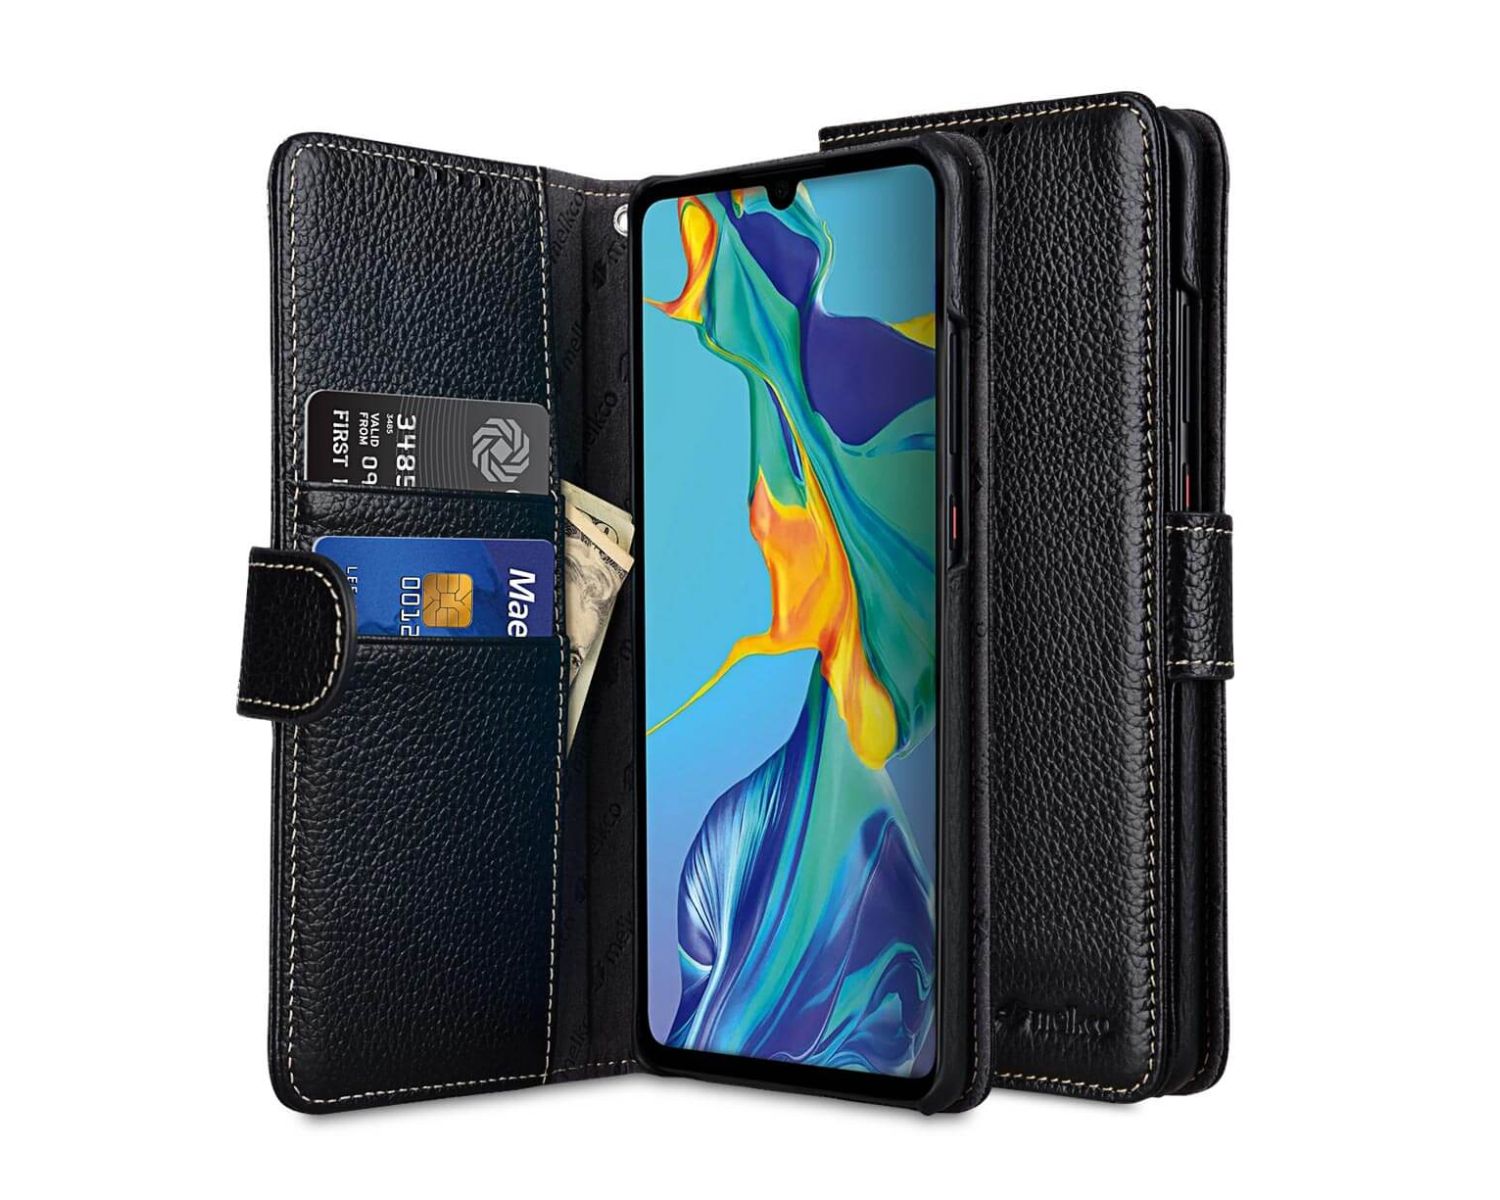 11-astounding-facts-about-huawei-p30-pro-cardholder-case